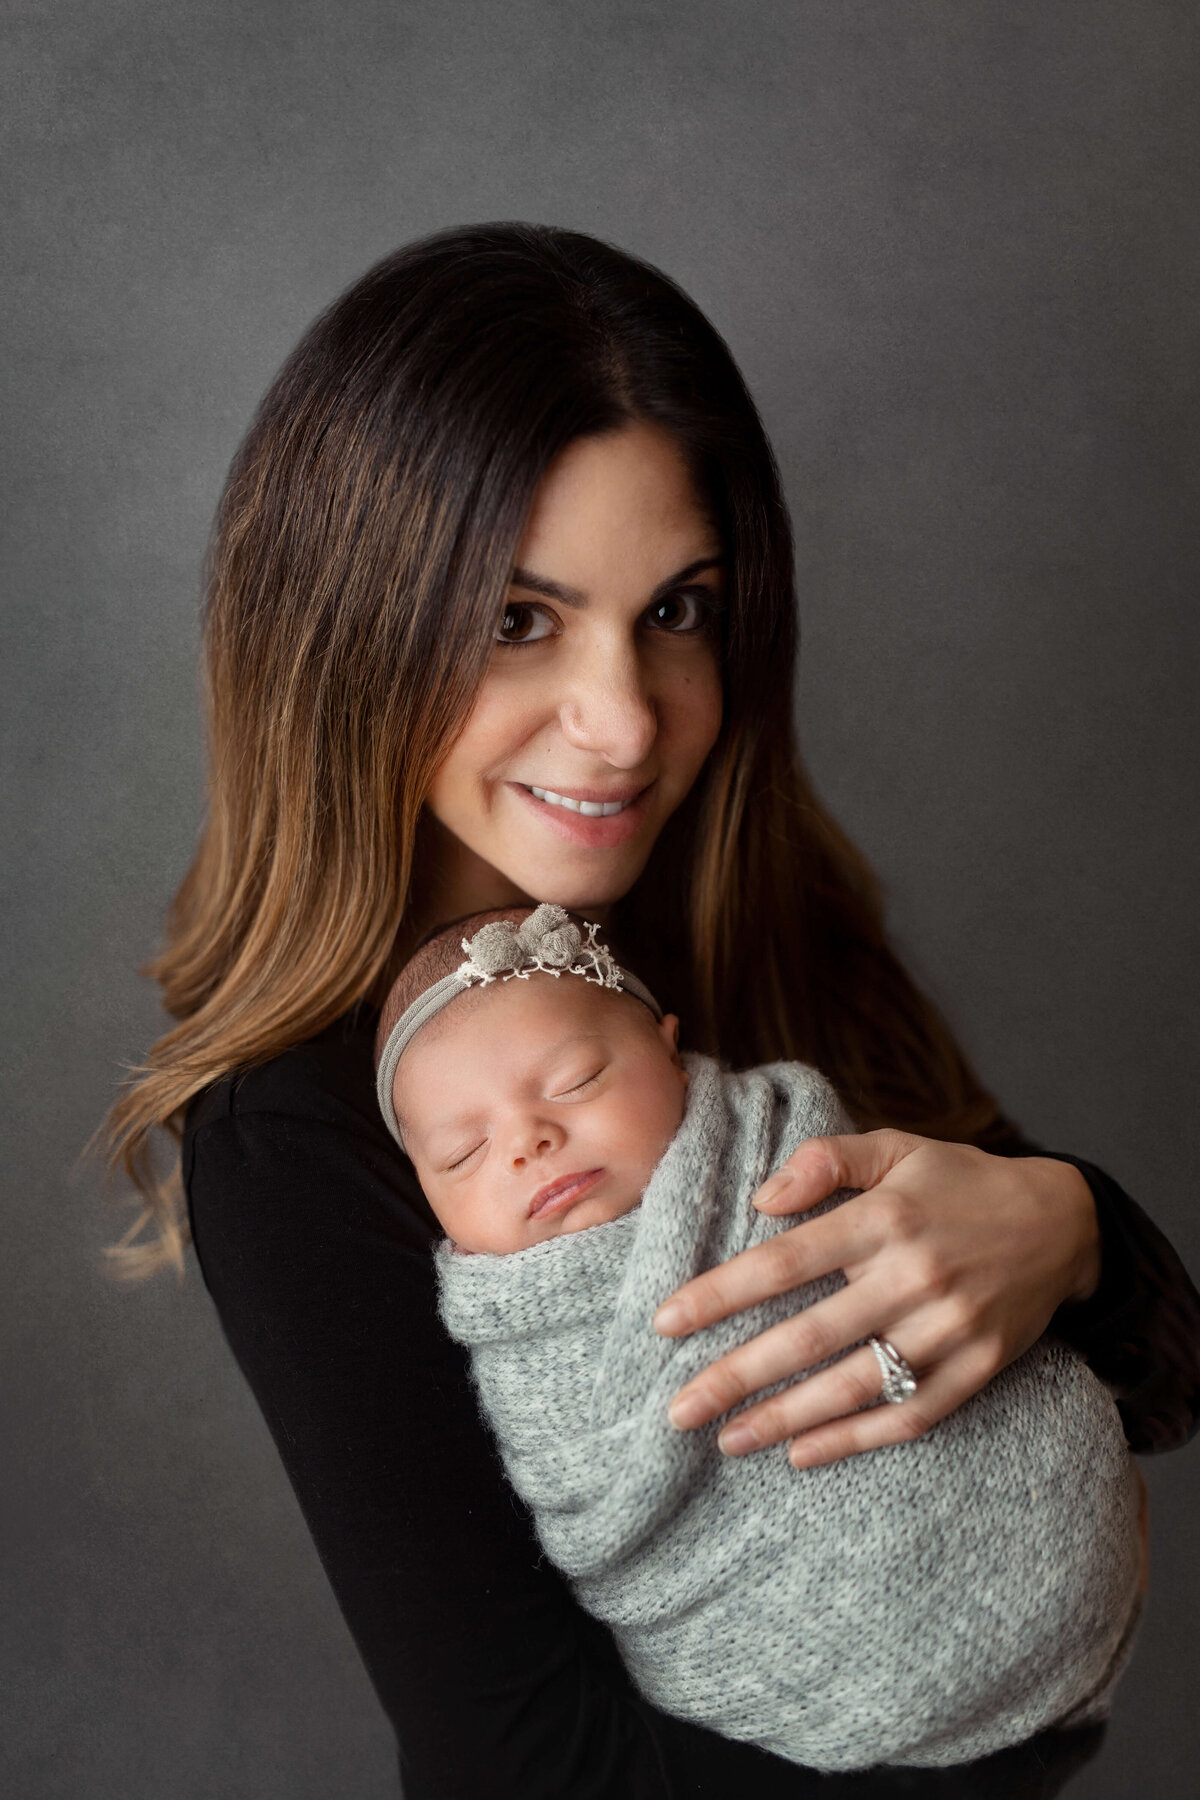 new mother wearing black holding her newborn baby girl who is swaddled in a grey knit wrap with a pretty headband during their newborn session